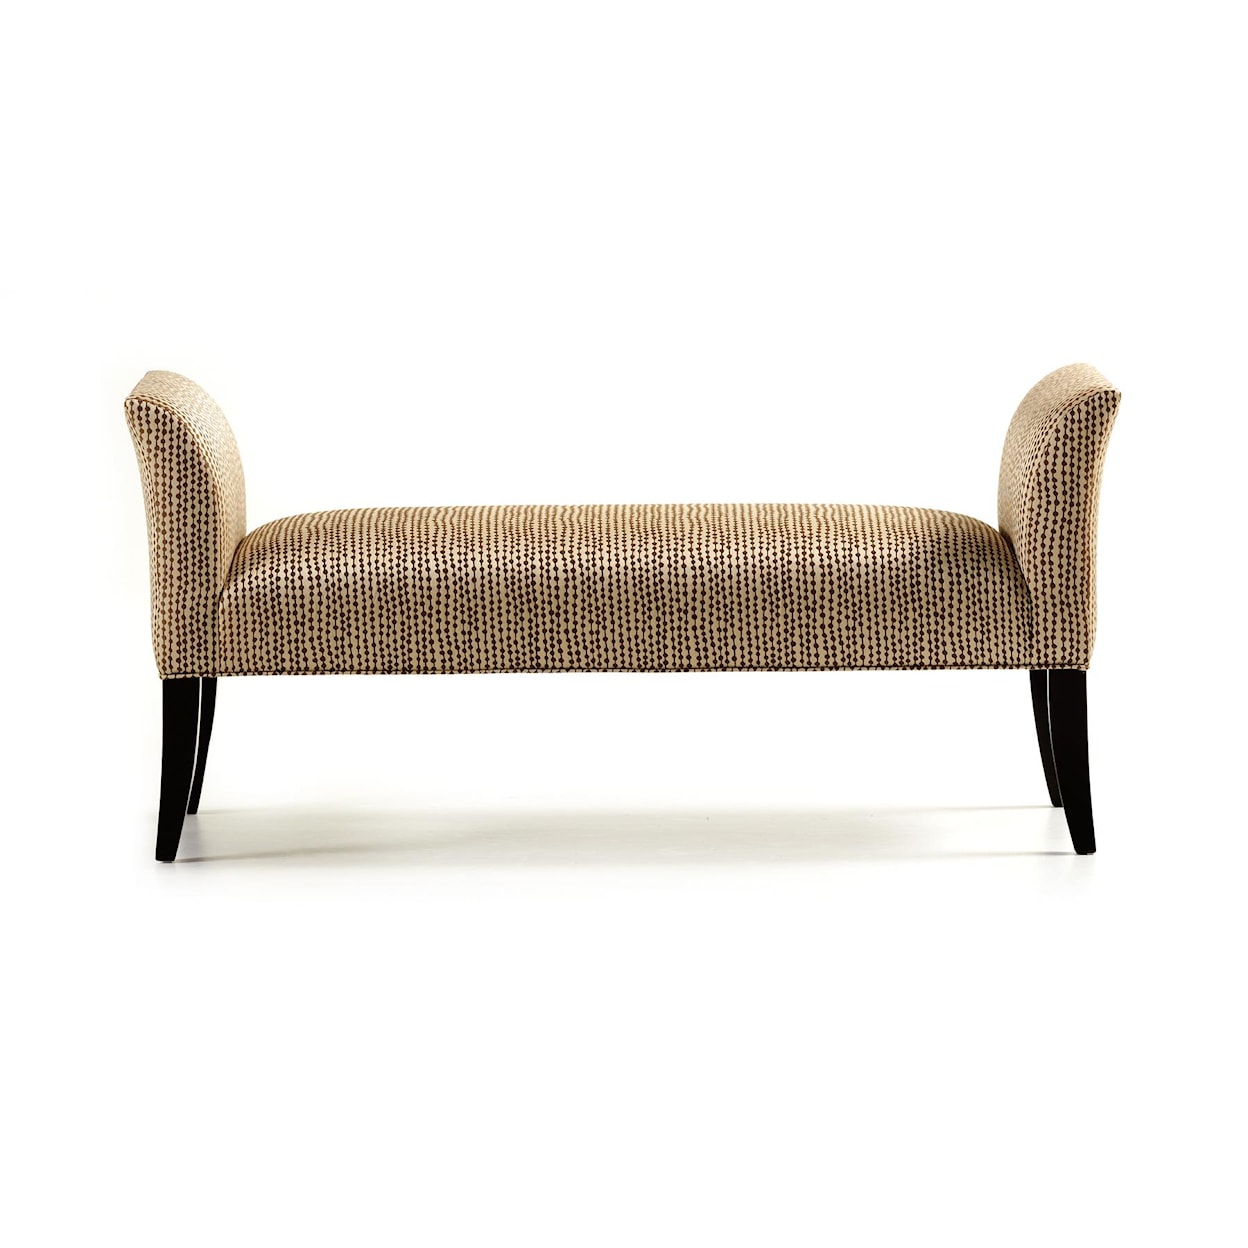 Jessica Charles Fine Upholstered Accents Locke Bench   